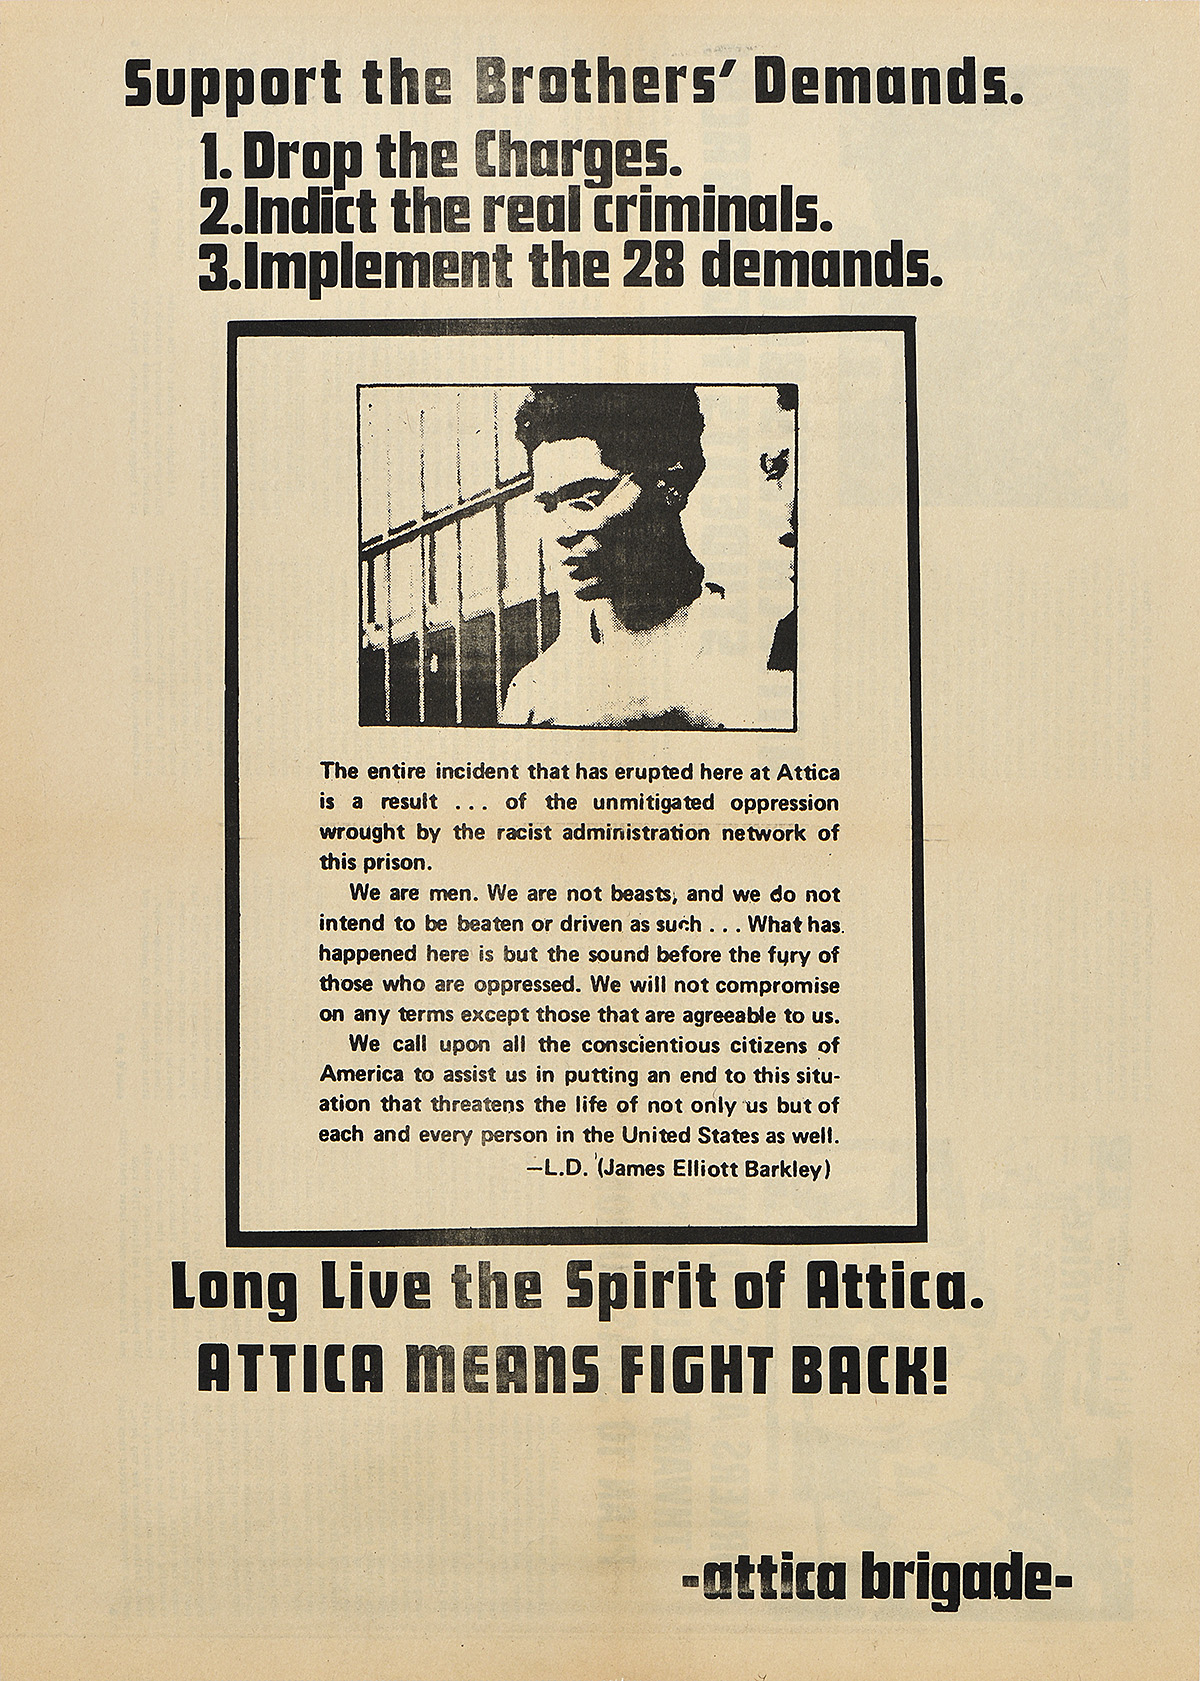 A poster of a Black man with glasses looking down, surrounded by text supporting the Brothers' demands.